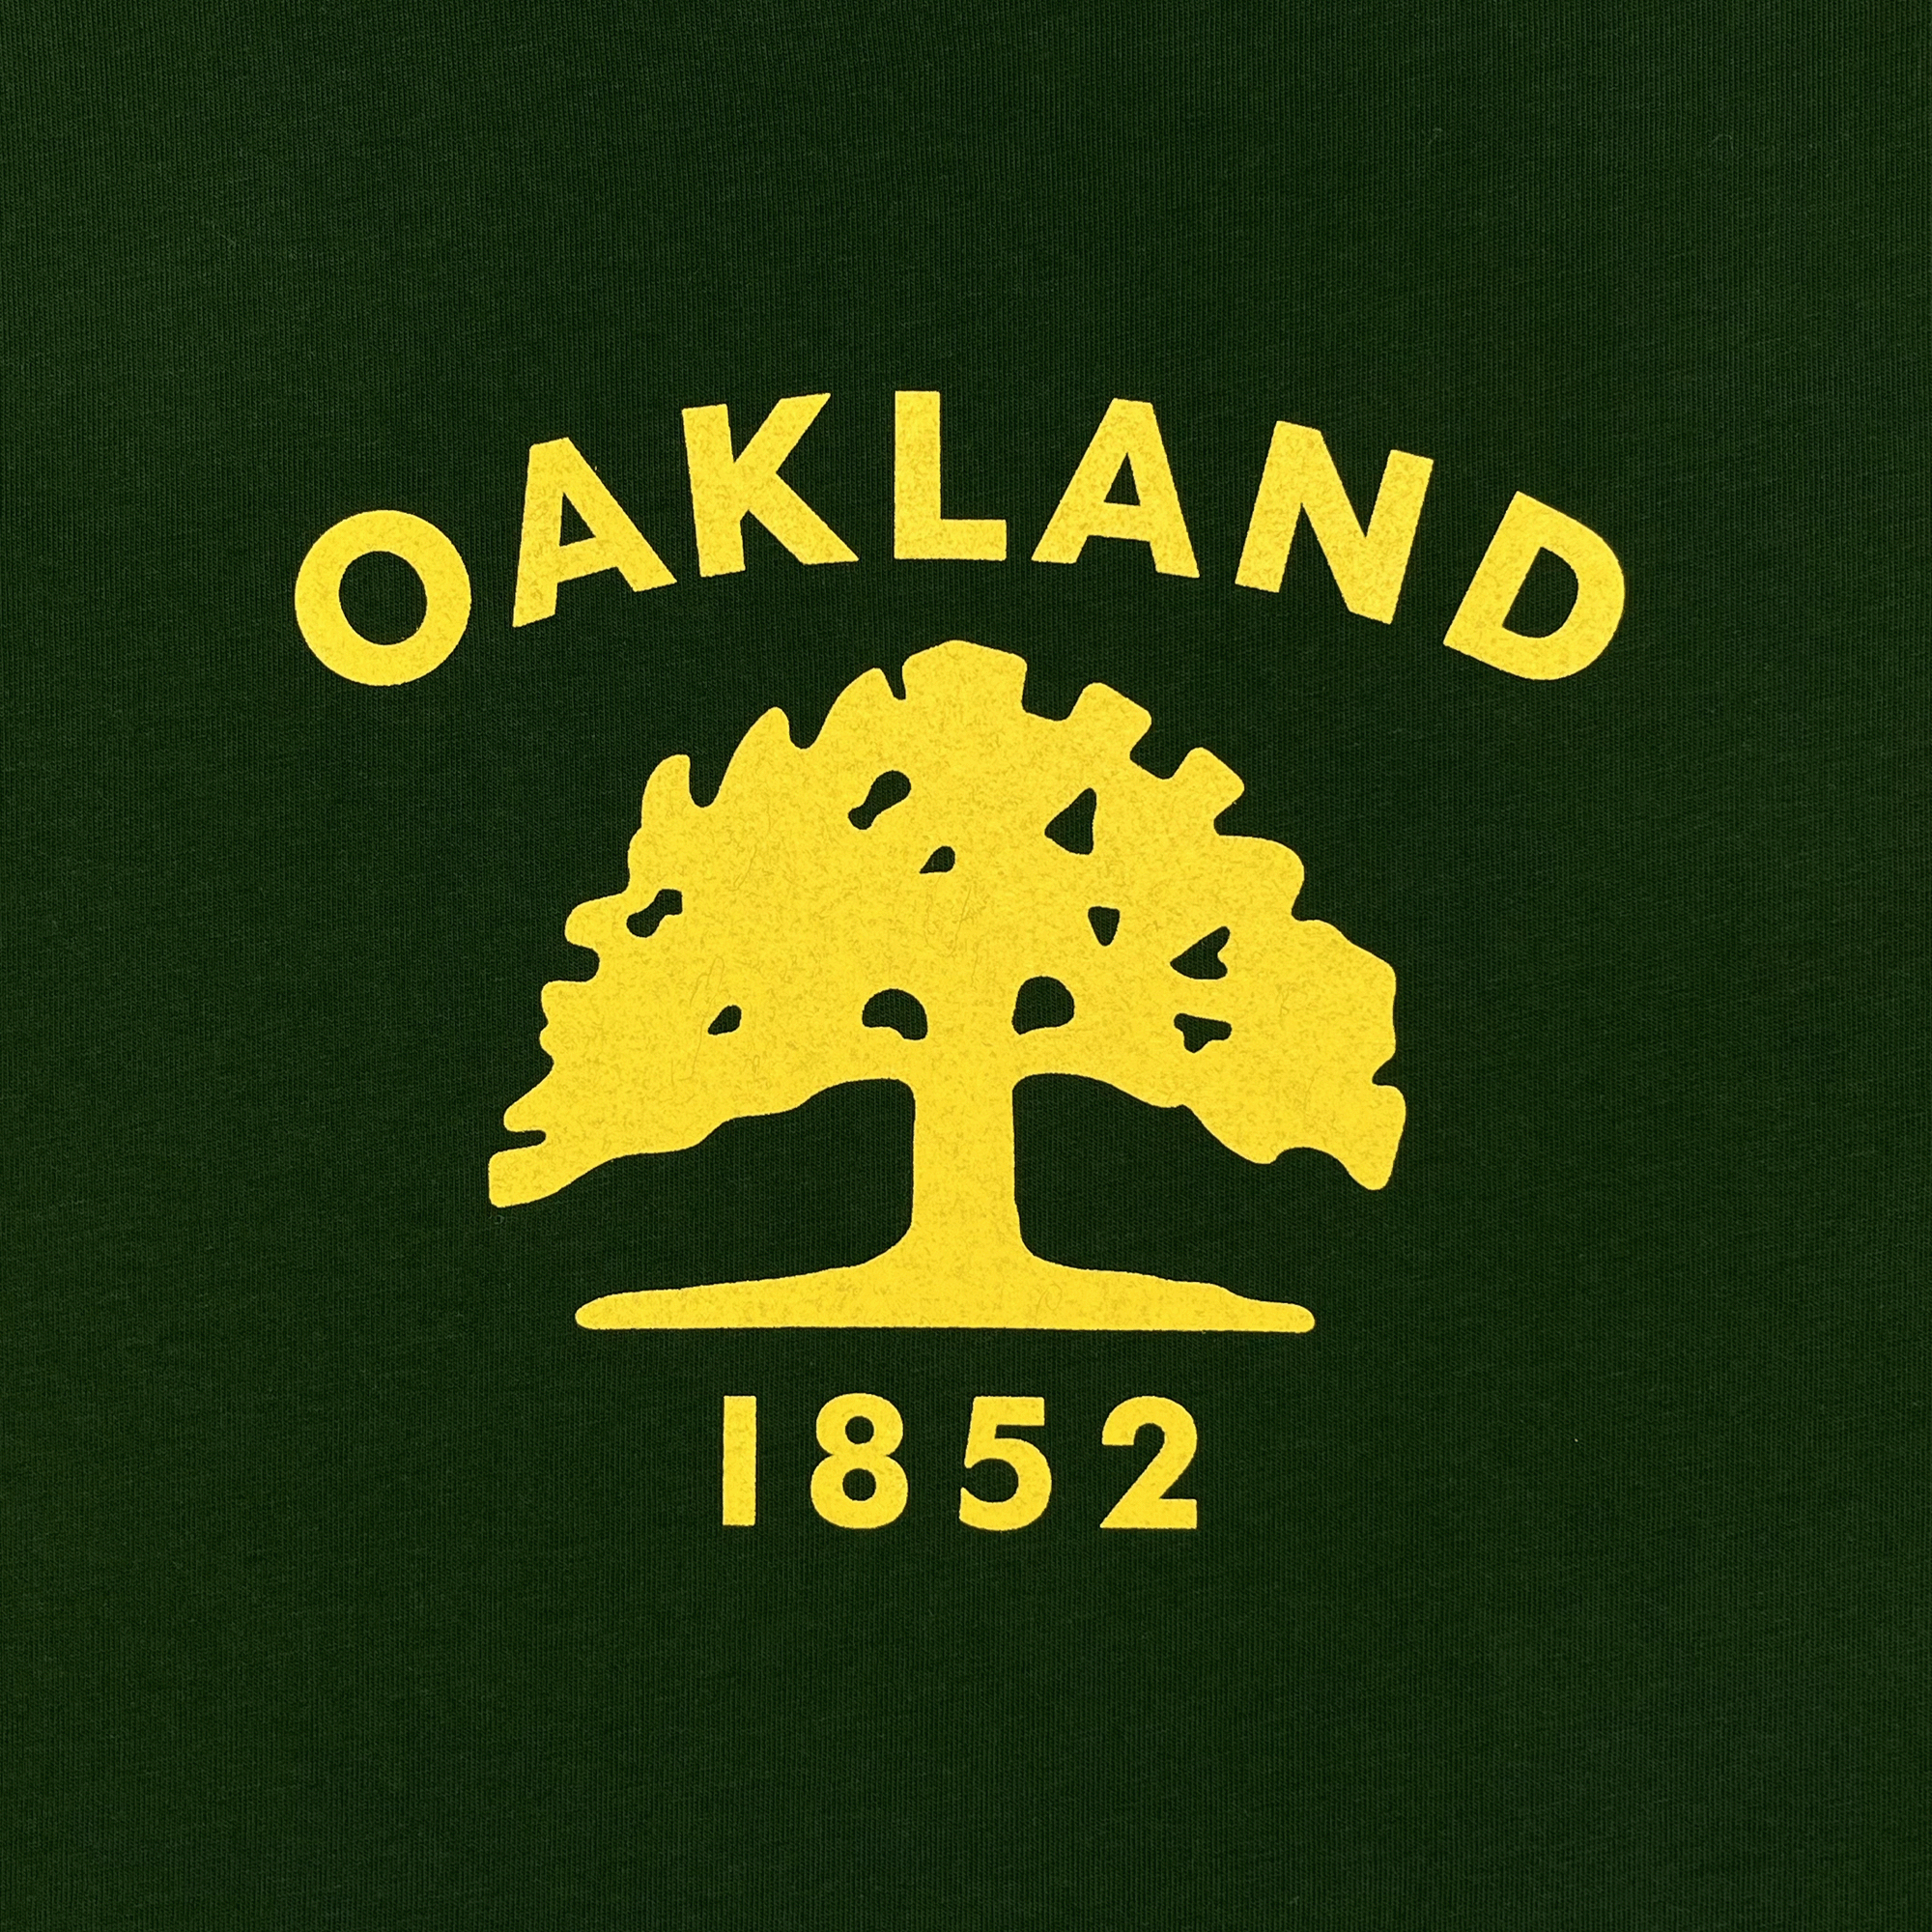 Detailed view of forest green t-shirt with yellow Oakland 1852 Flag graphic.